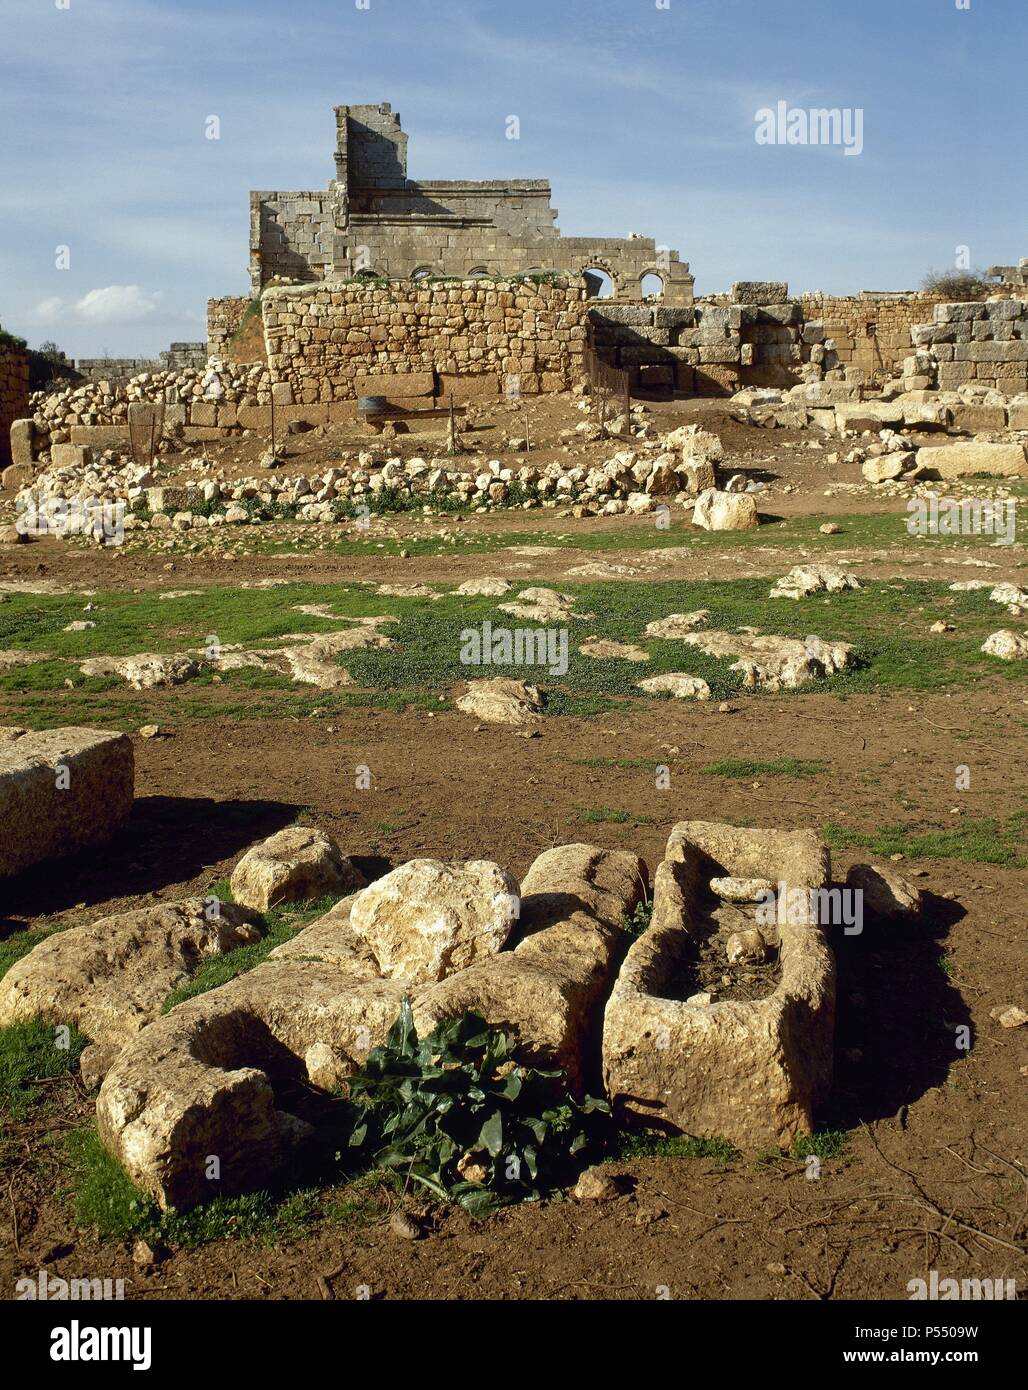 Syria. Rueiha. Dead Cities or Forgotten Cities. Northwest Syria. Roman Empire to Byzantine Christianity. 1st to 7th century, abandoned between 8th-10th centuries. Unesco World Heritage Site. Historical photography (before Civil War Syria). Stock Photo